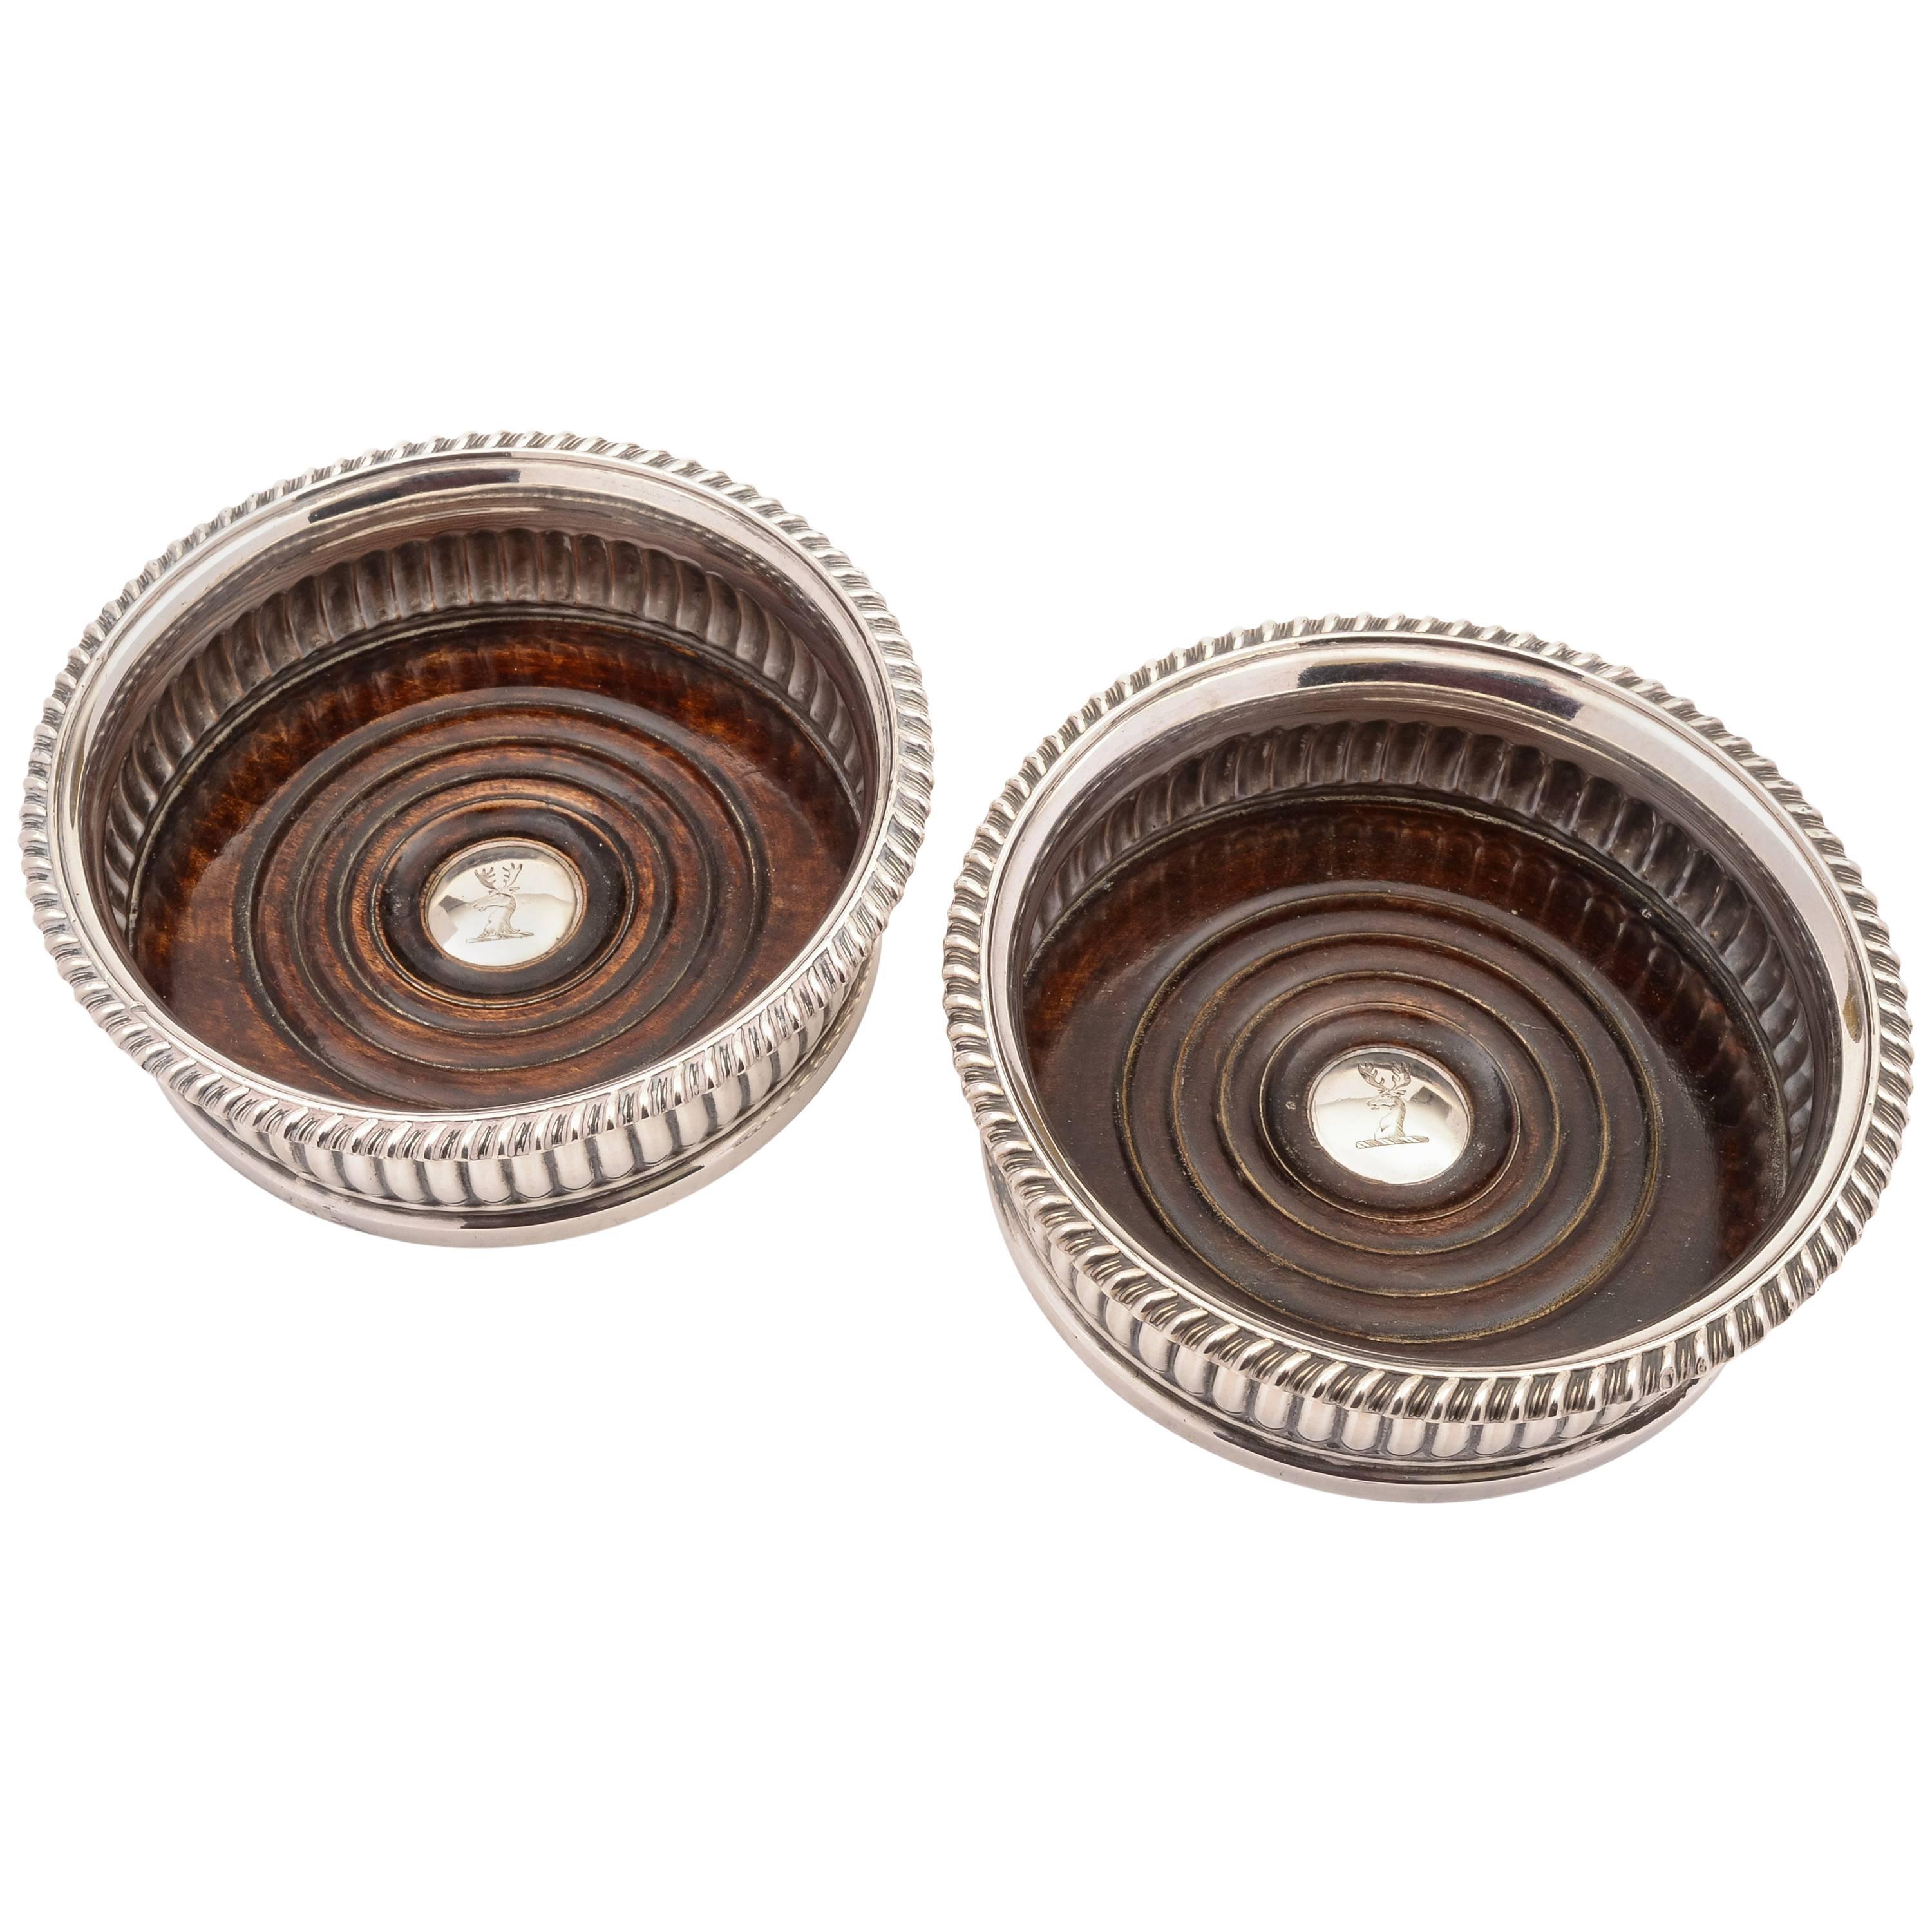 Pair of Sheffield Plated Coasters, circa 1840